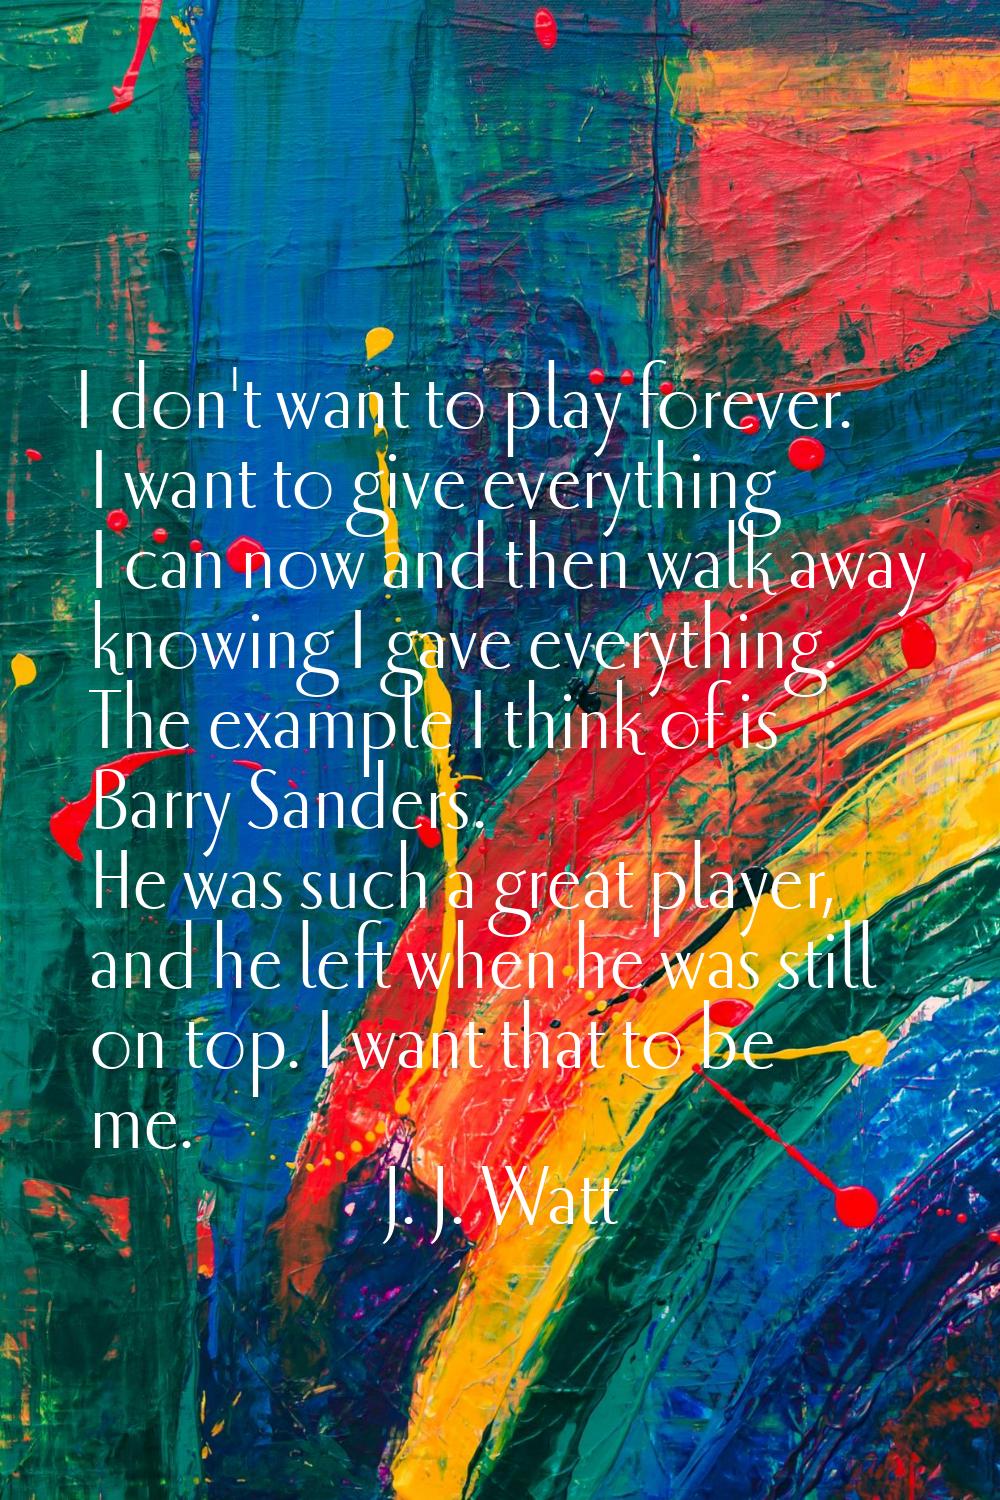 I don't want to play forever. I want to give everything I can now and then walk away knowing I gave